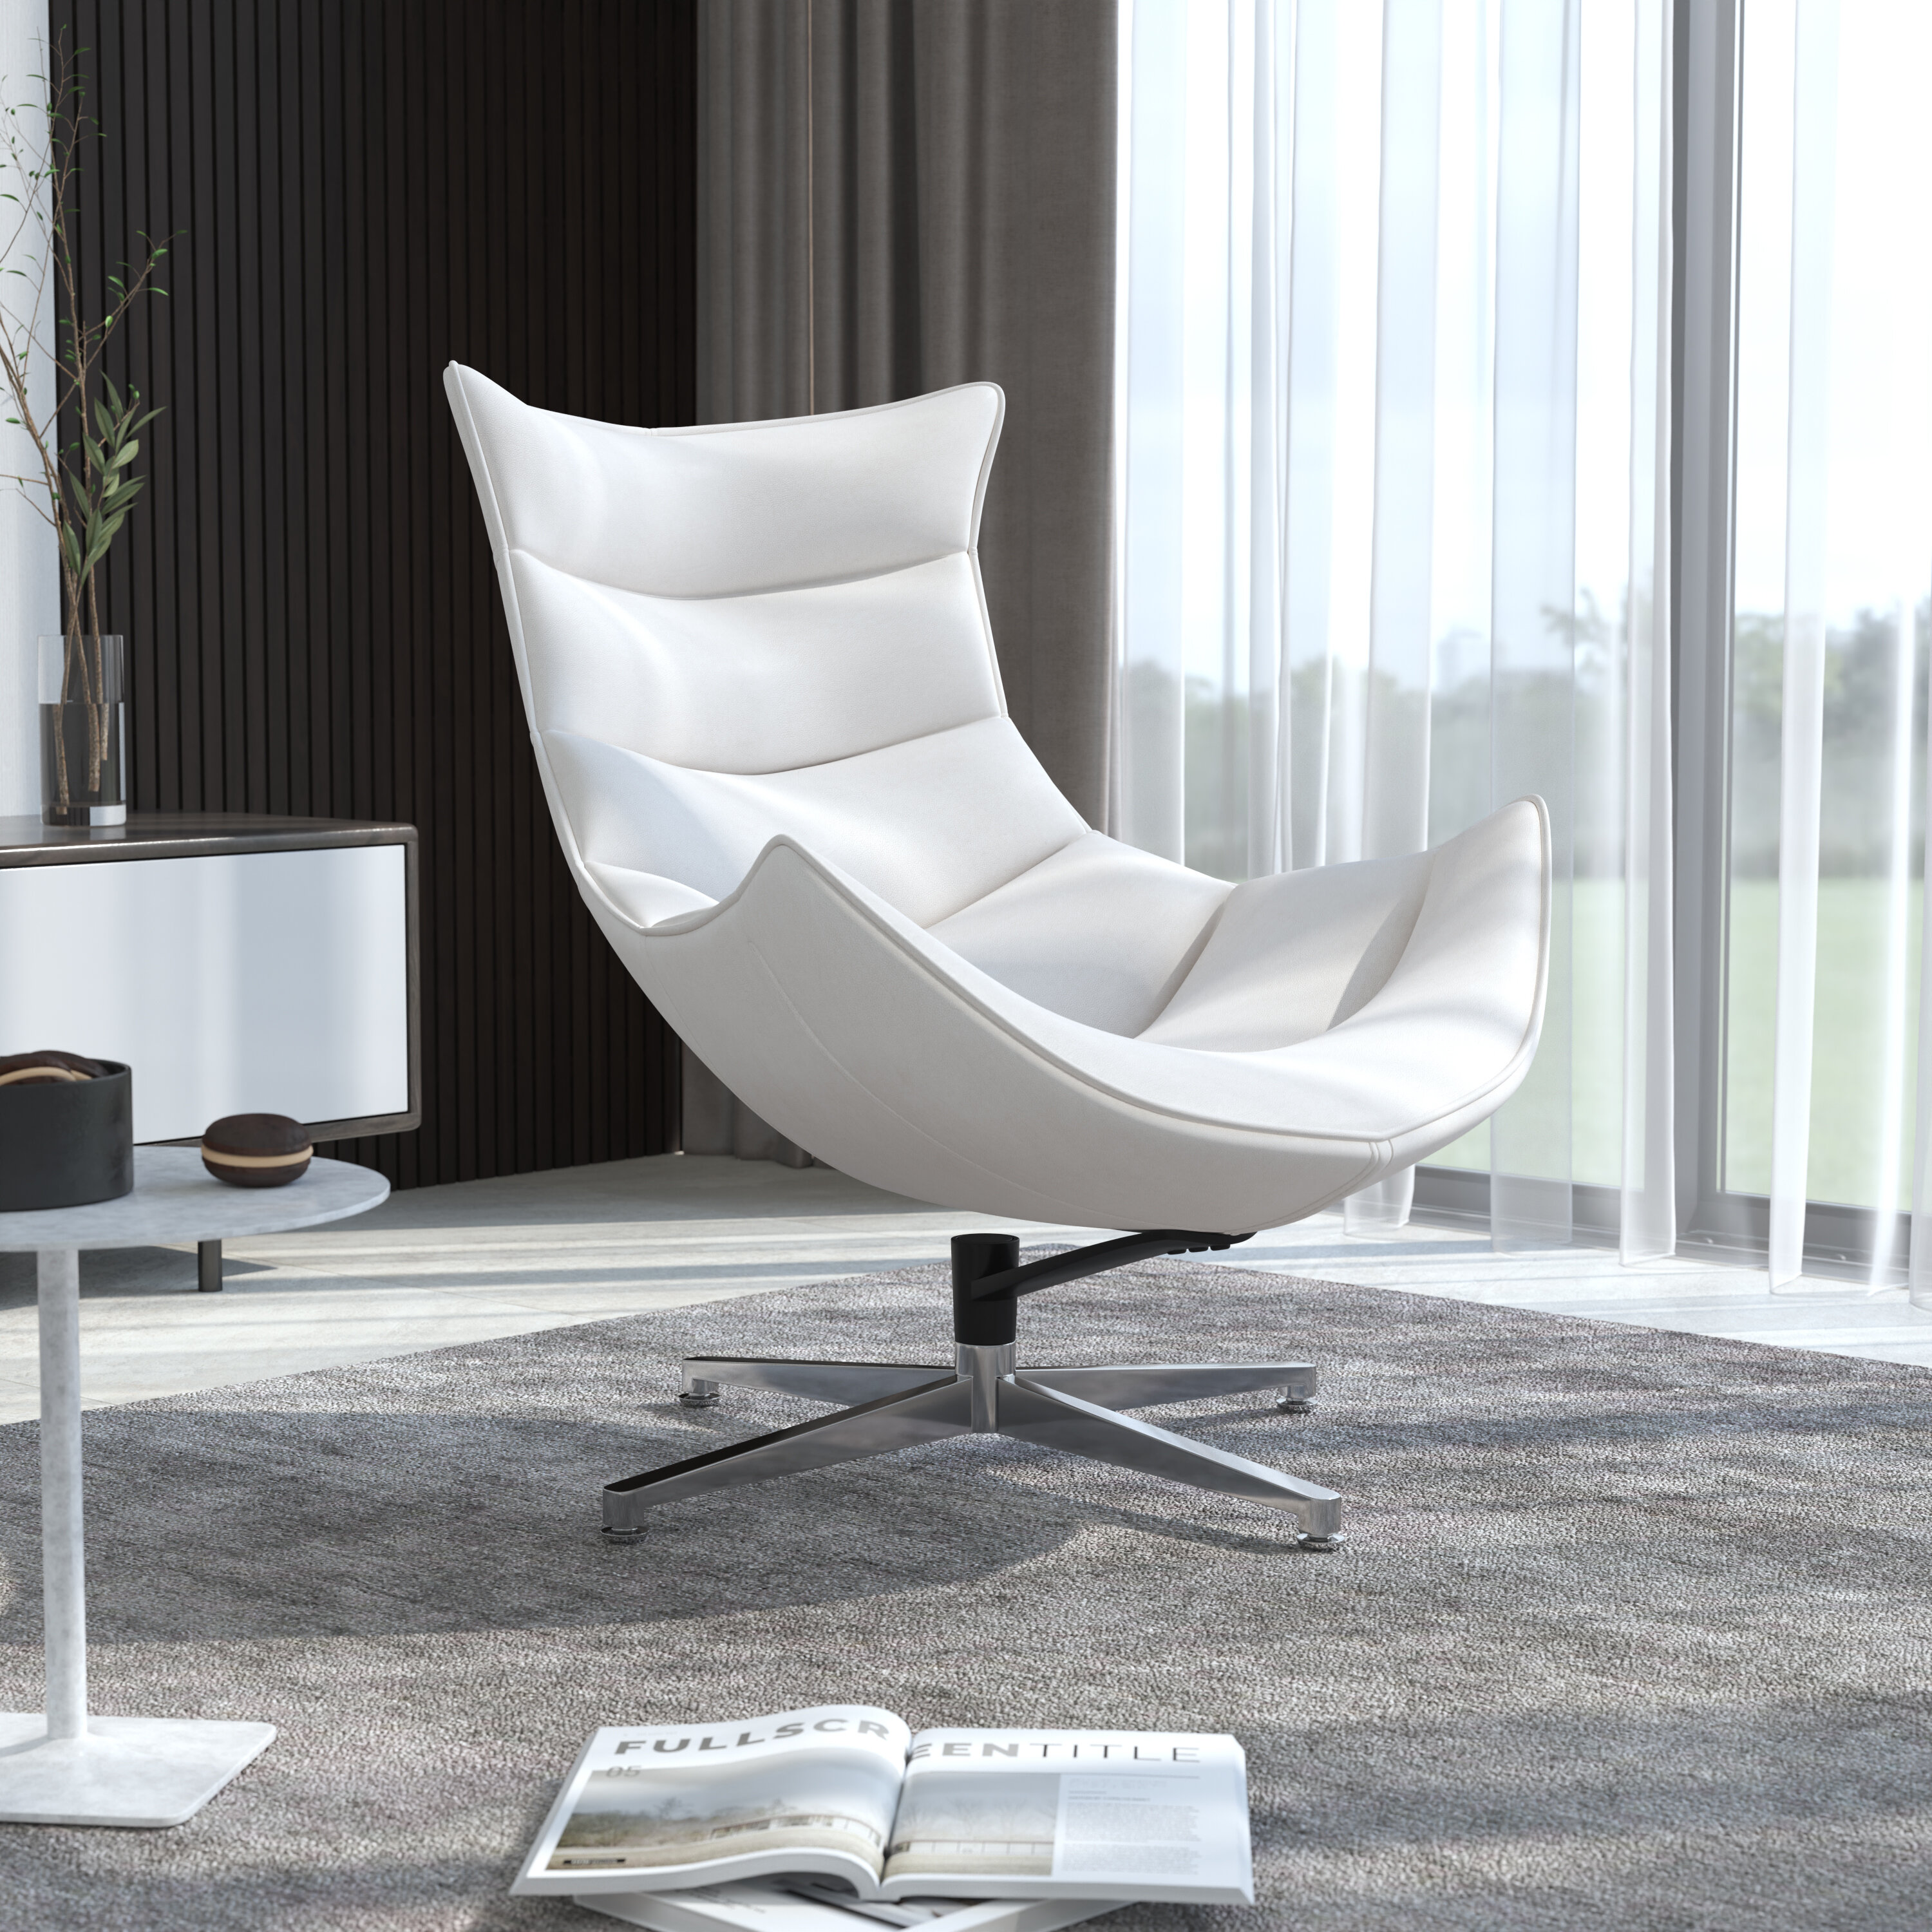 Wyndham Home Office Swivel Cocoon Chair - Living Room Accent Chair